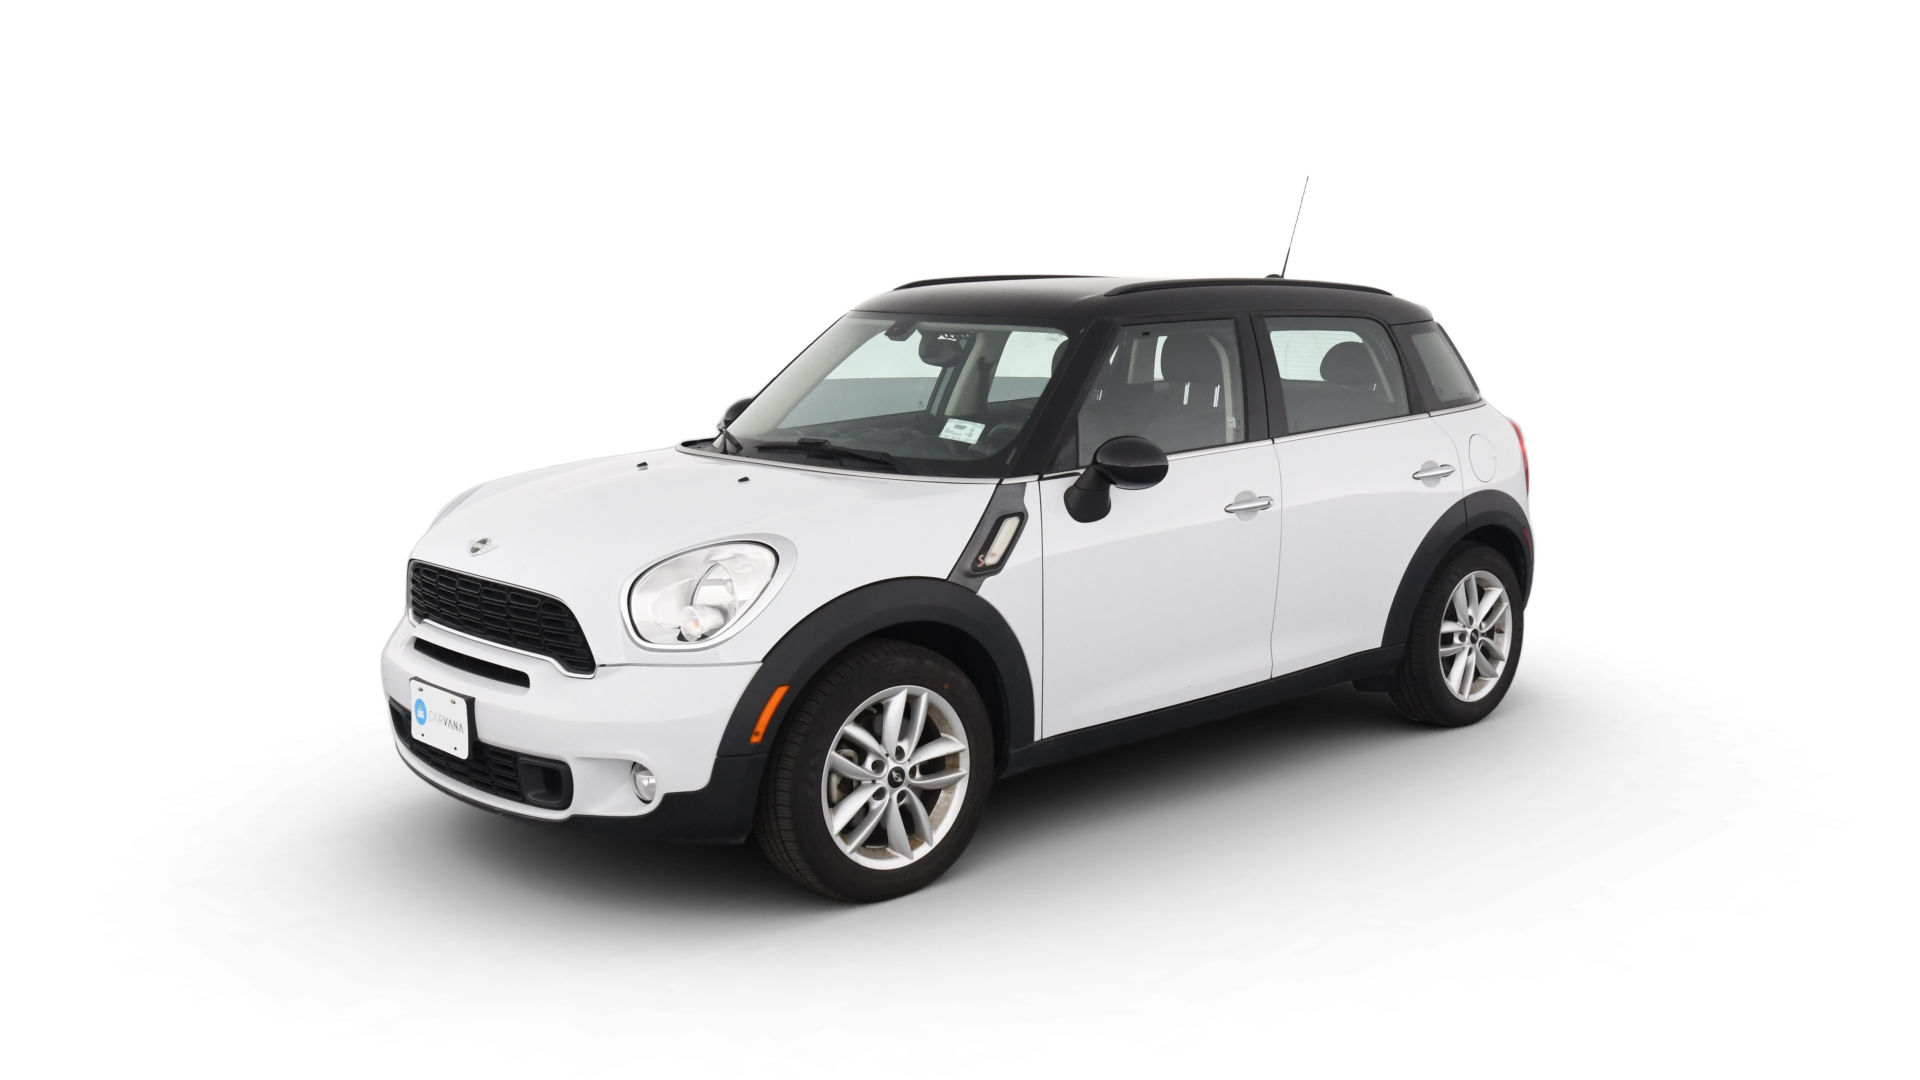 Used 2012 MINI Countryman Cooper S For Sale Online | Carvana